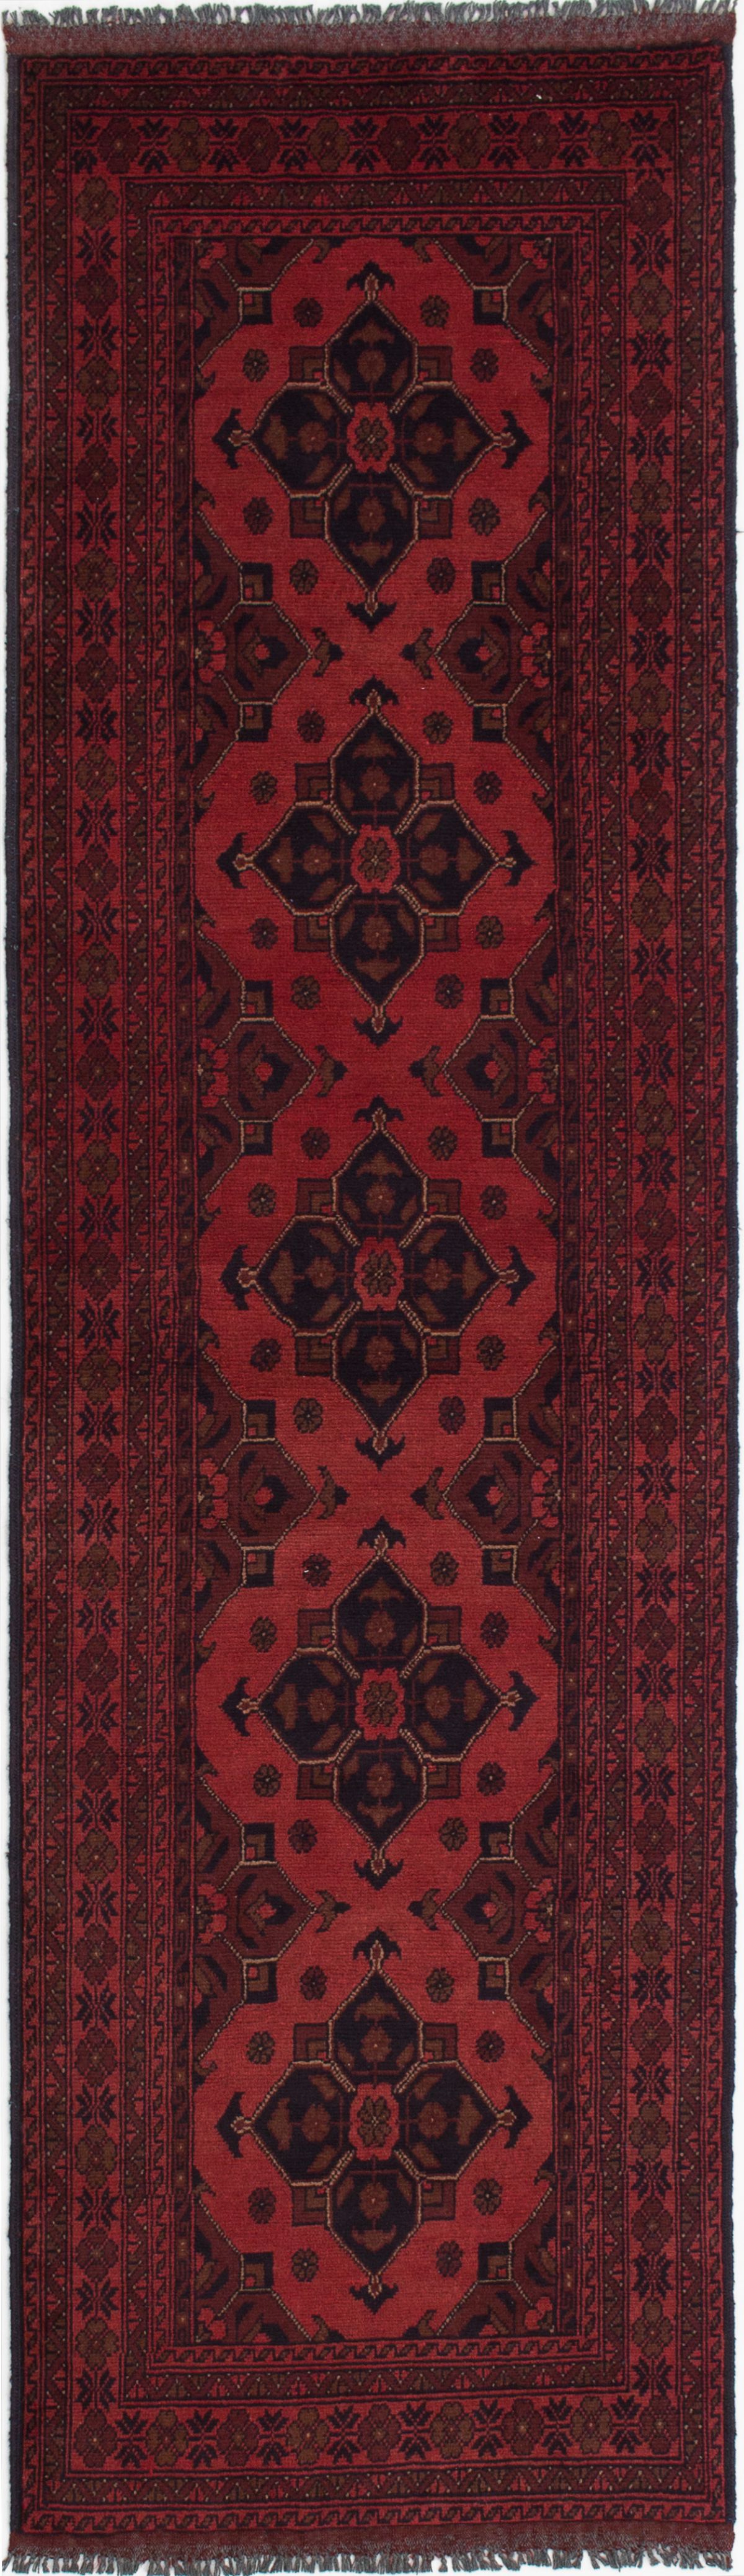 Hand-knotted Finest Khal Mohammadi Dark Copper Wool Rug 2'10" x 9'7" Size: 2'10" x 9'7"  